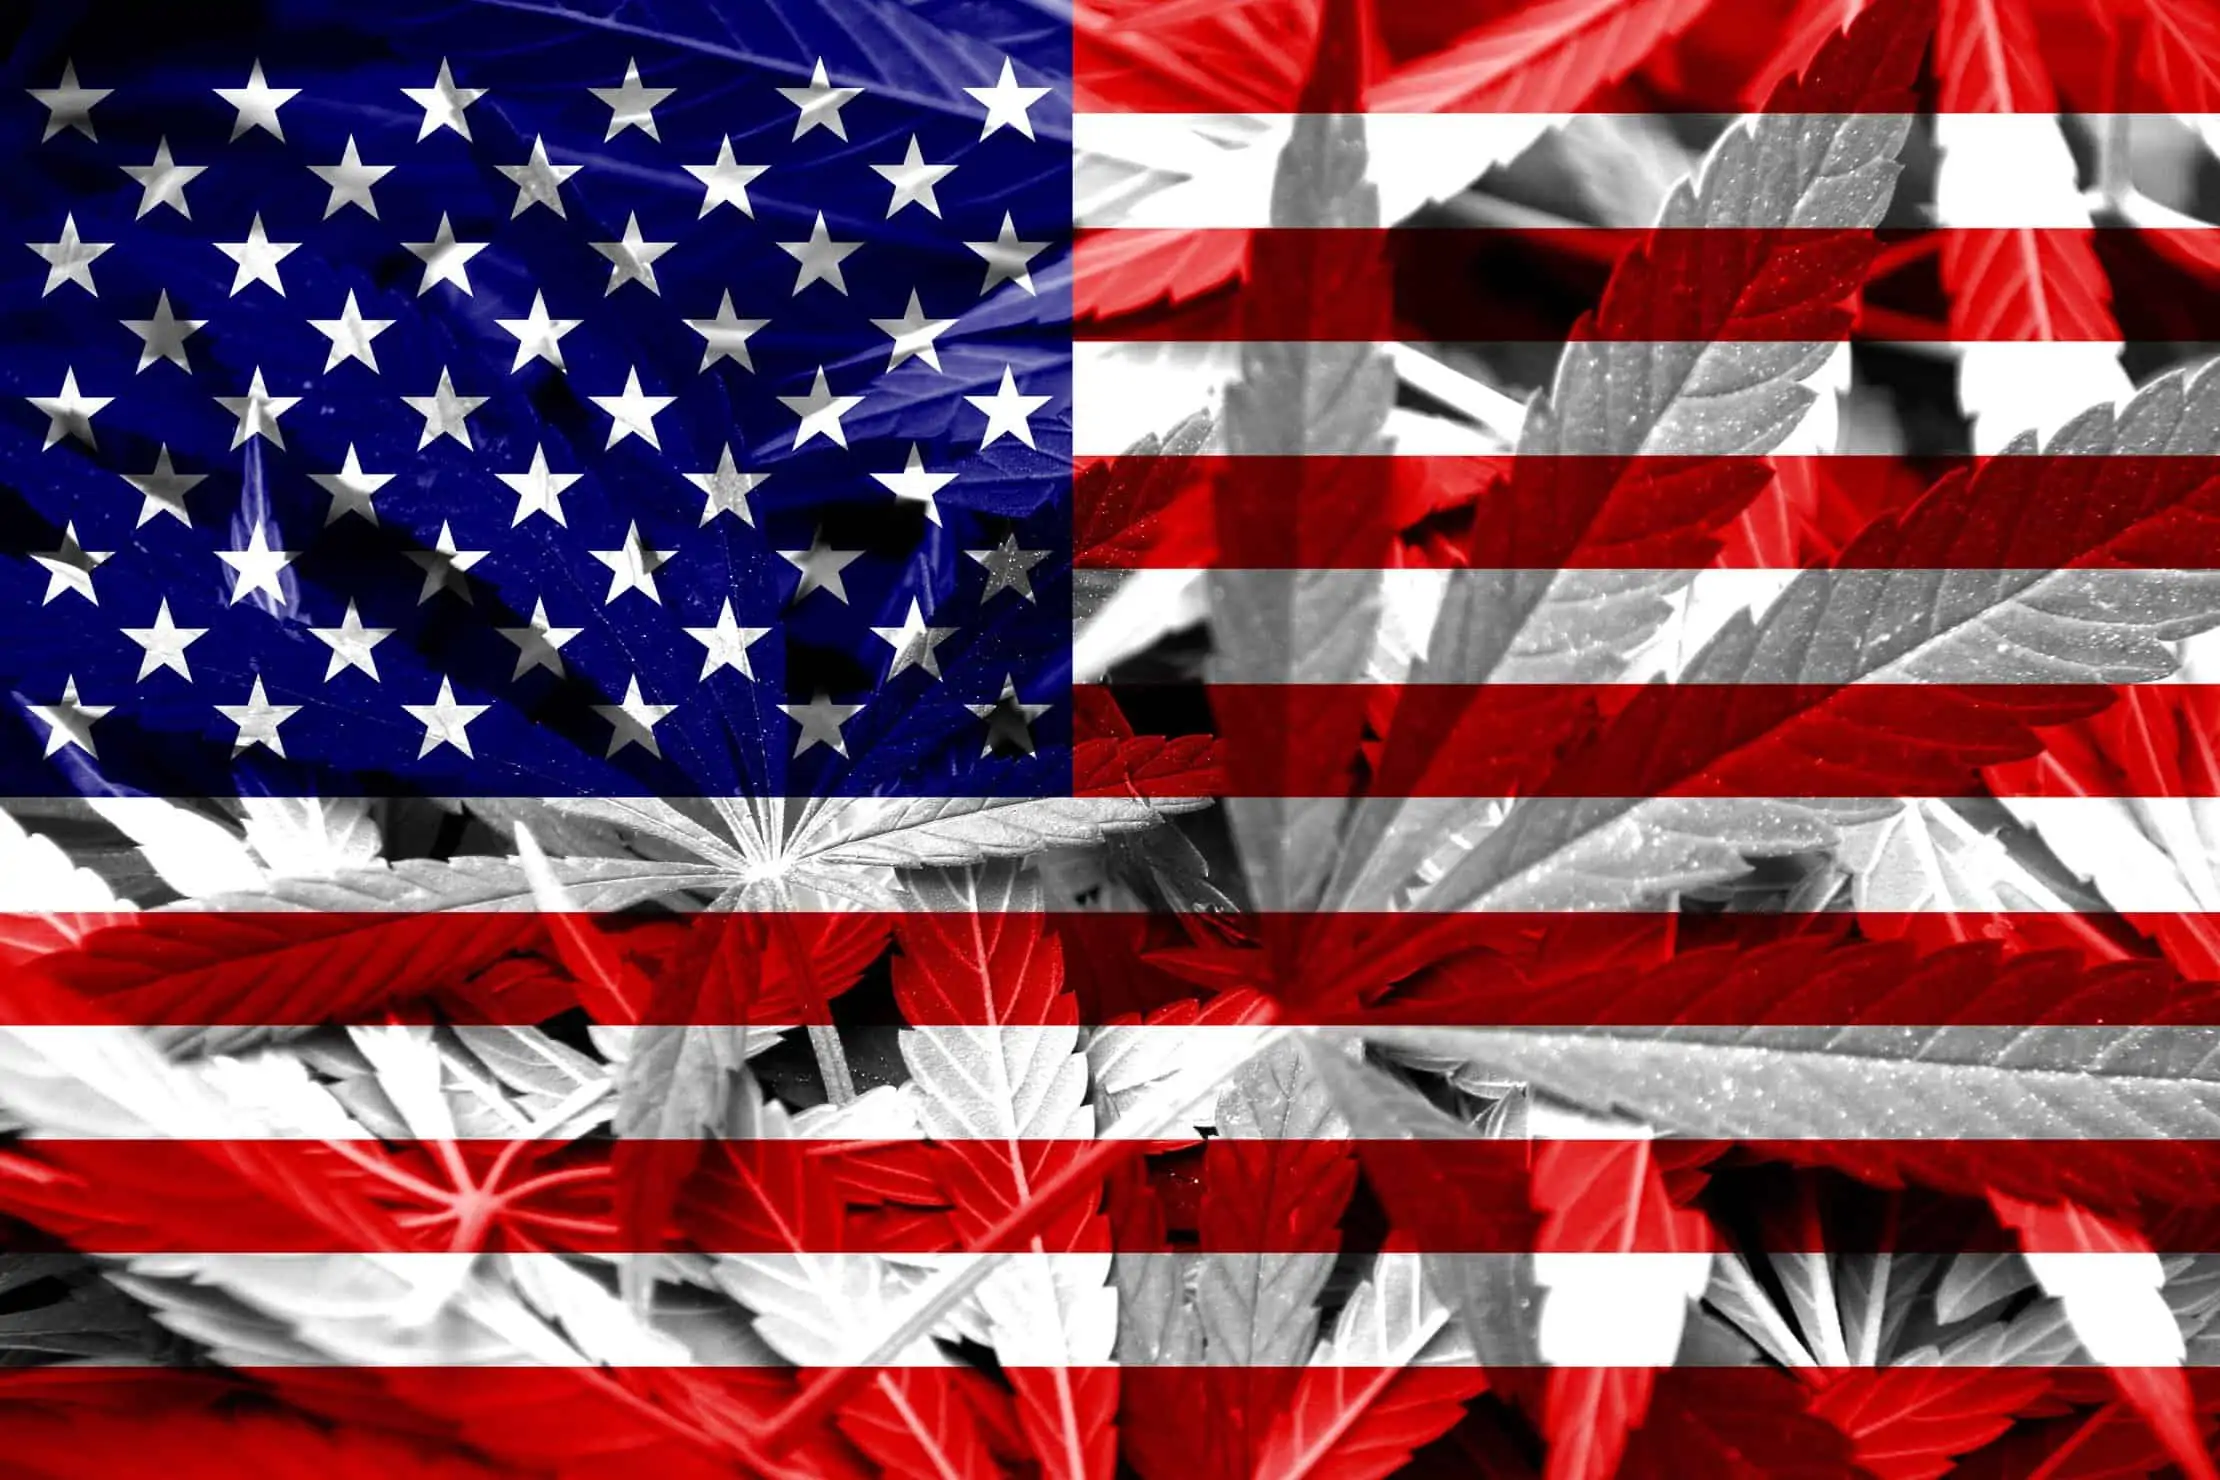 An Argument For Full Marijunana Legalization By 2021 In The USA. US flag with marijuana leaves.